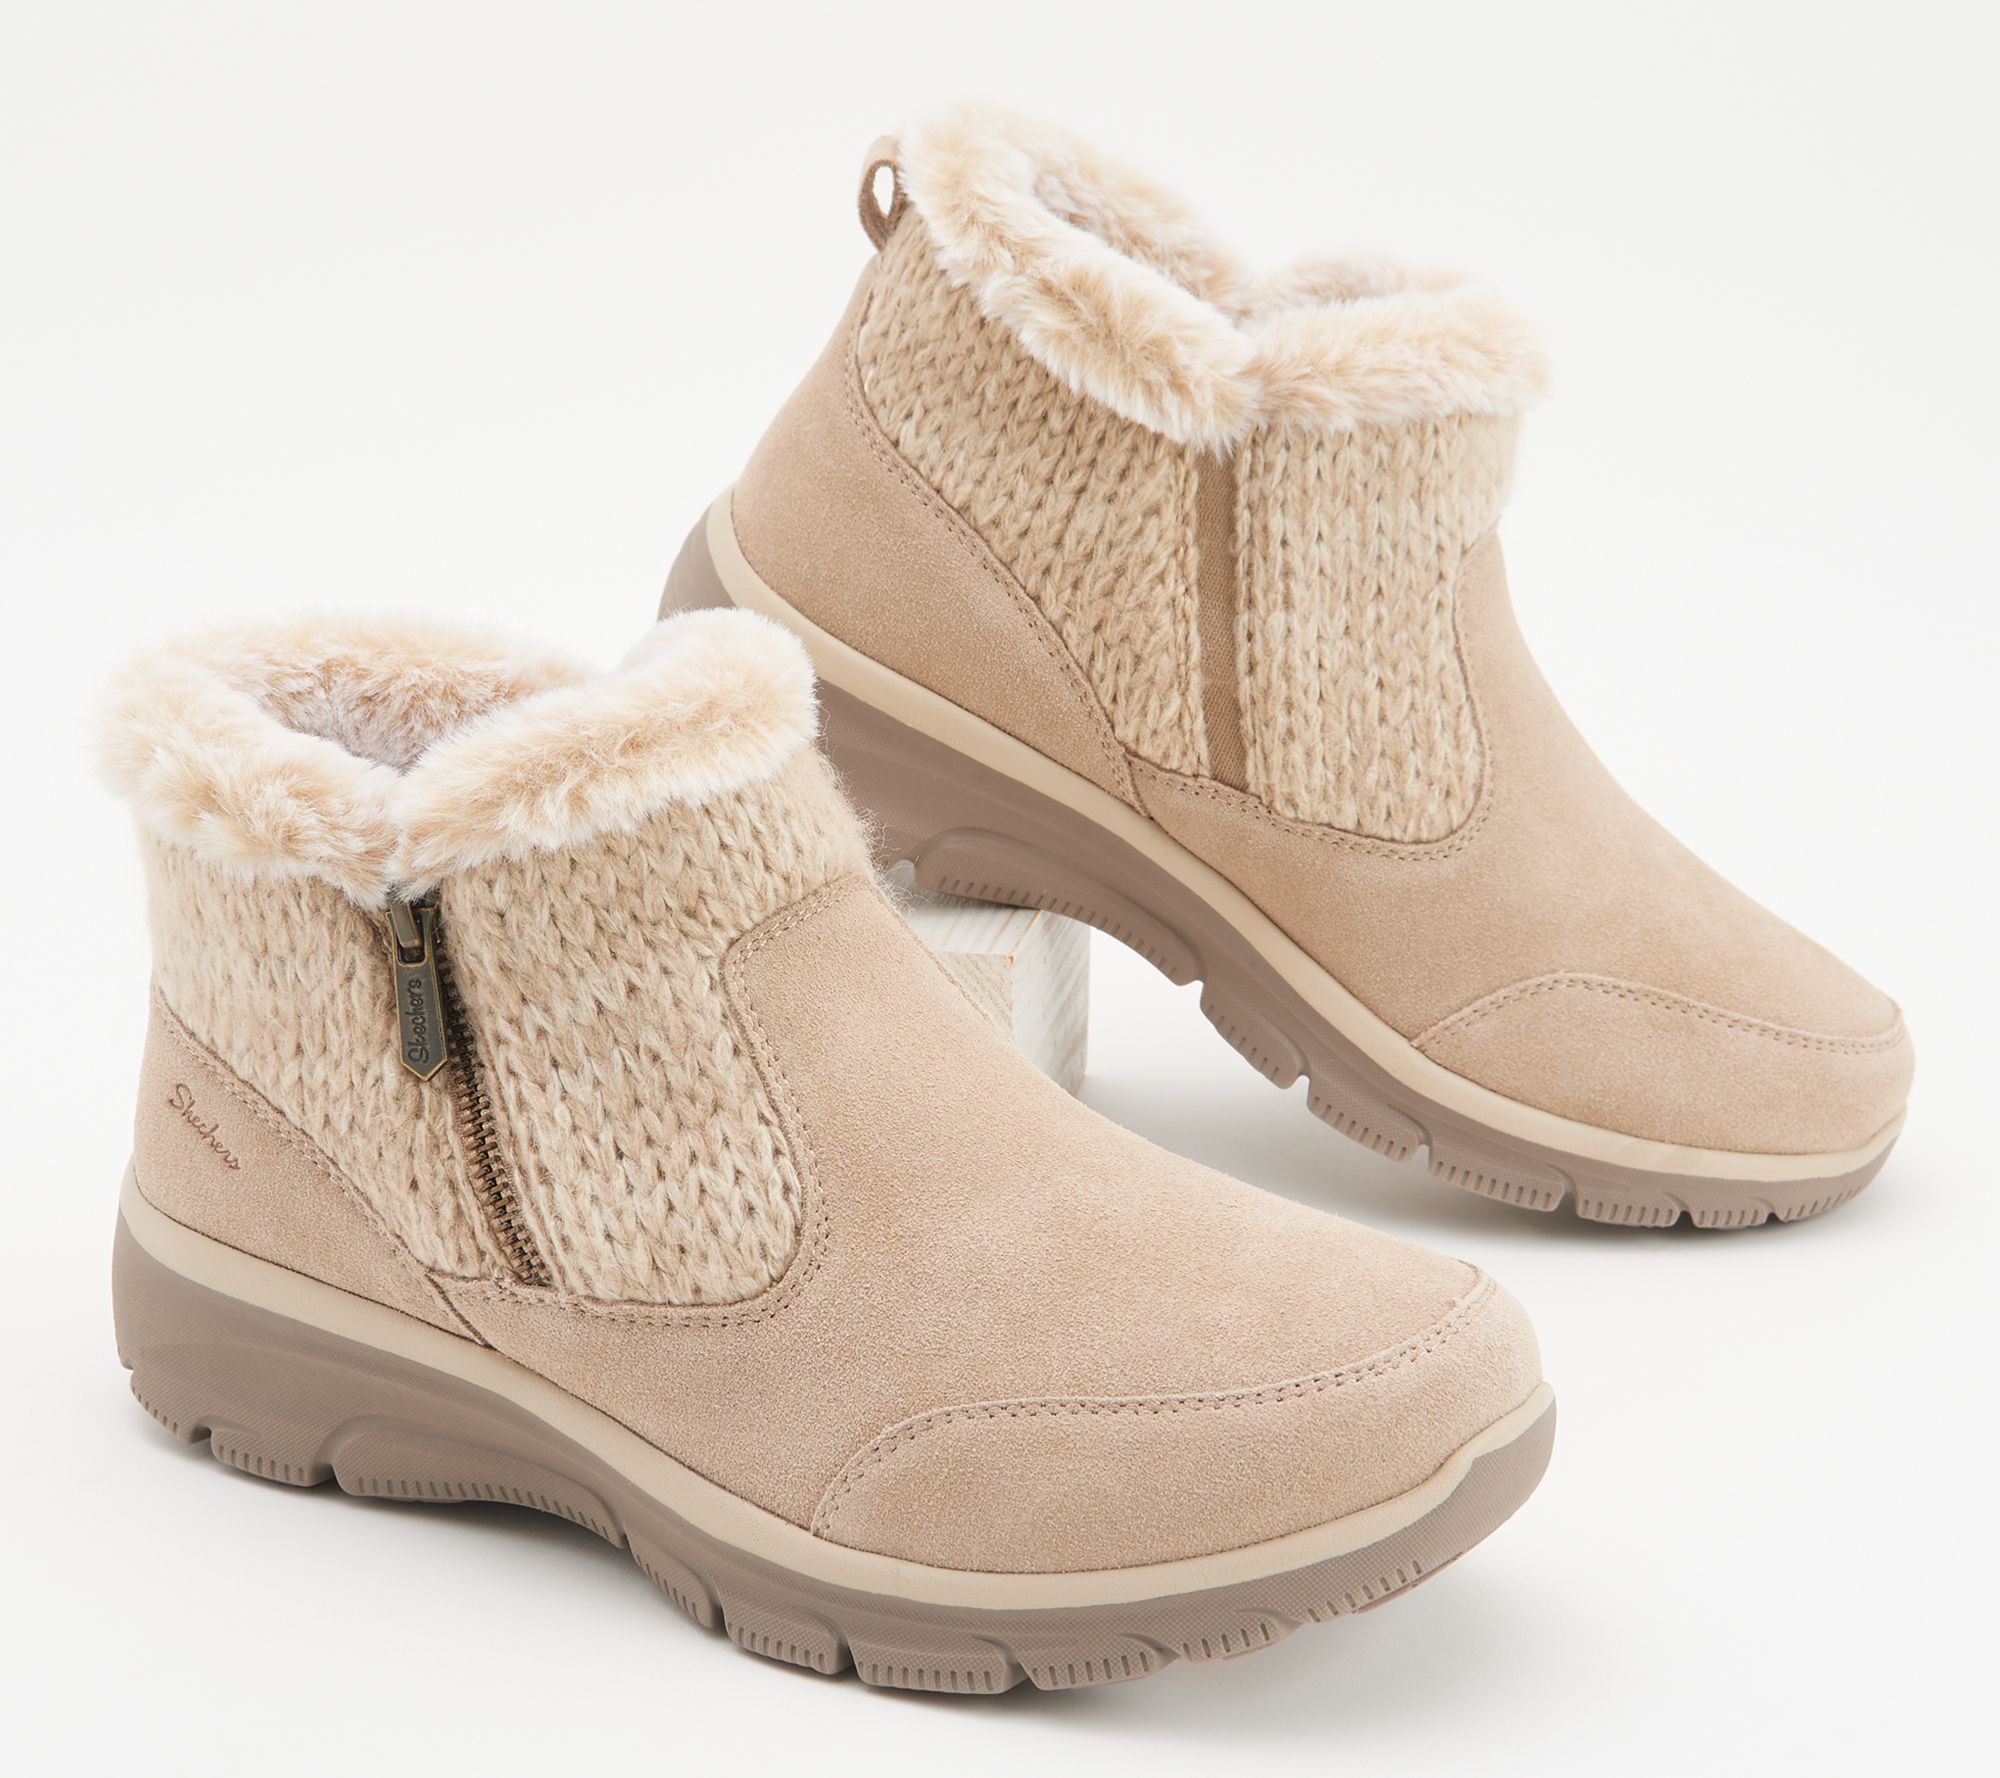 Skechers Easy Going Sweater Ankle Boots - Warmhearted - QVC.com